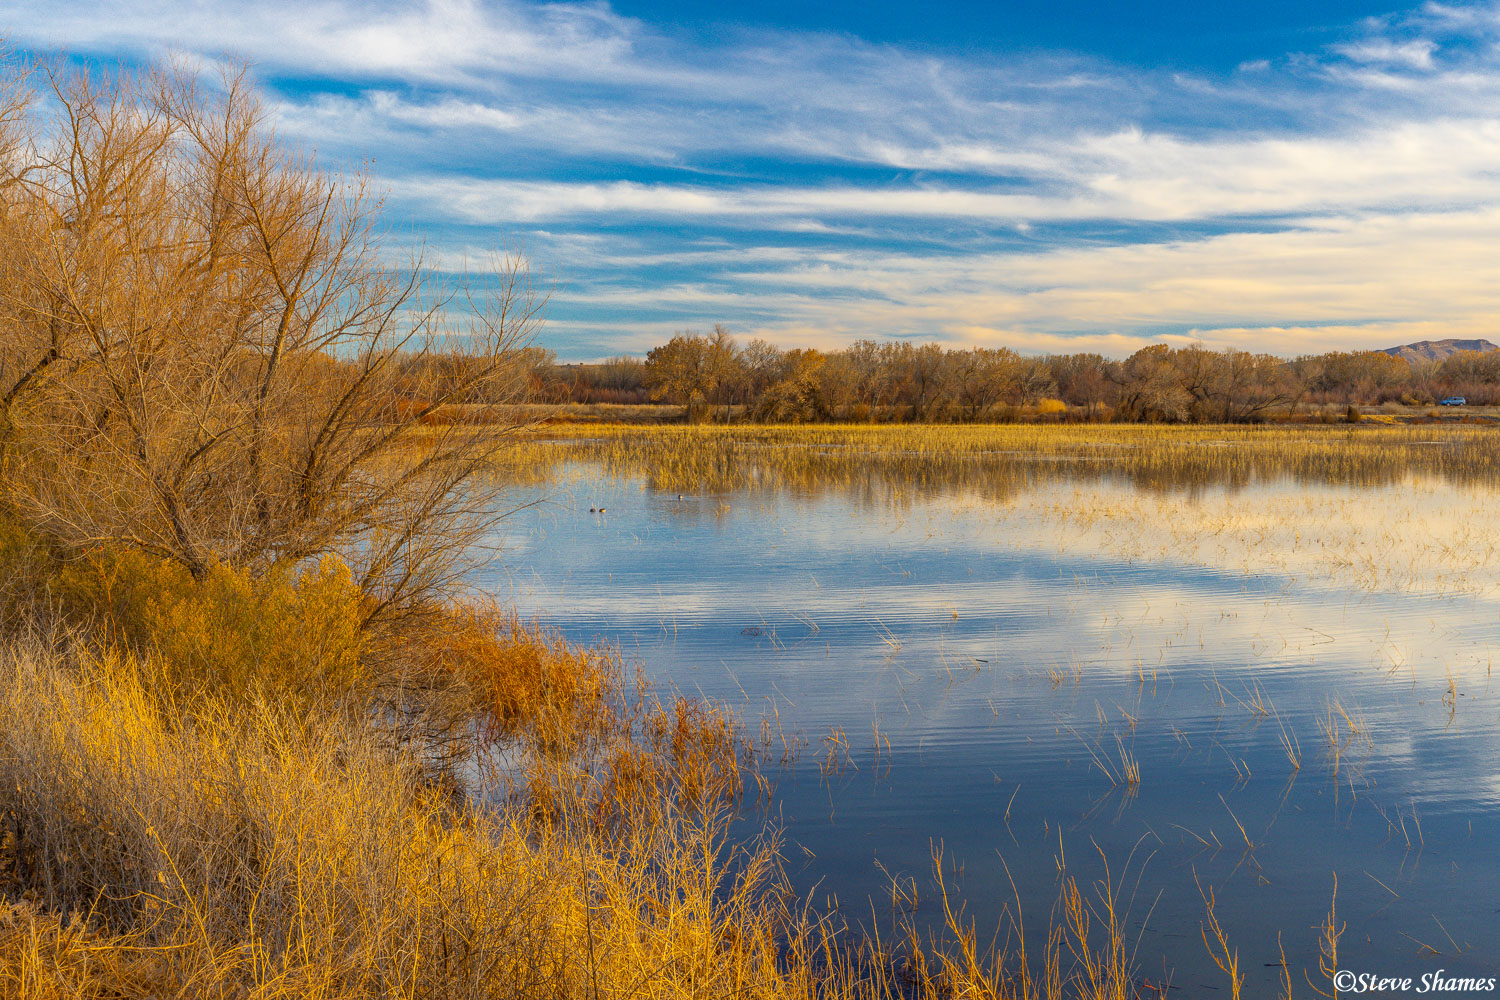 New Mexico wetlands! I like the reflection of that great sky in the water.